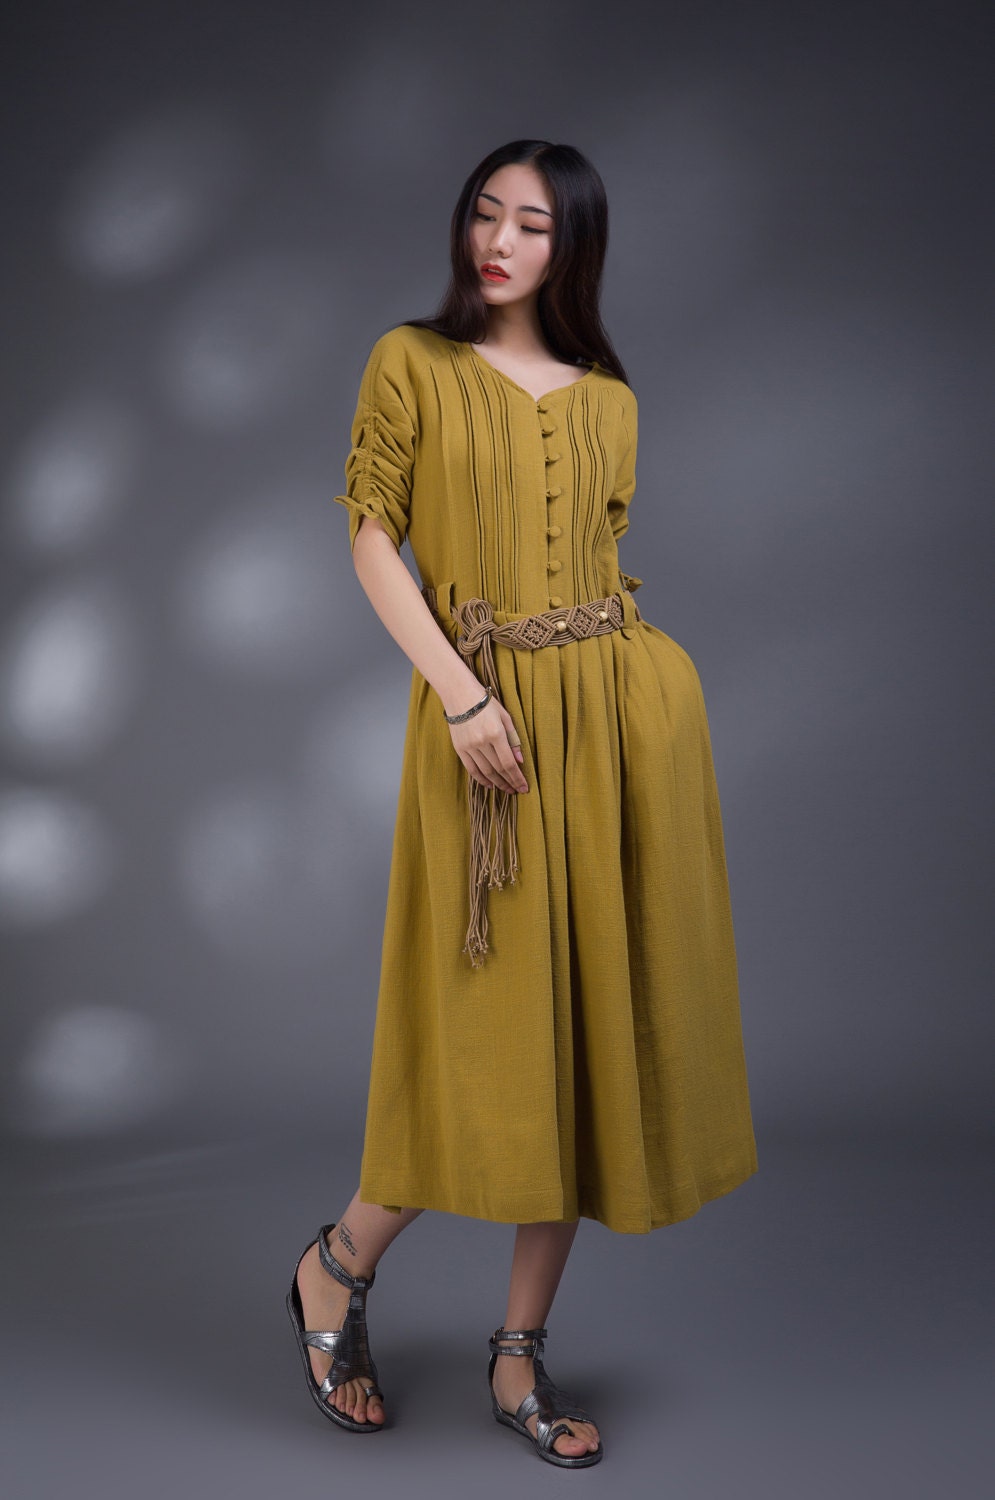 Loose Fitting Sundress Long Sleeve SunDress in by FashionColours